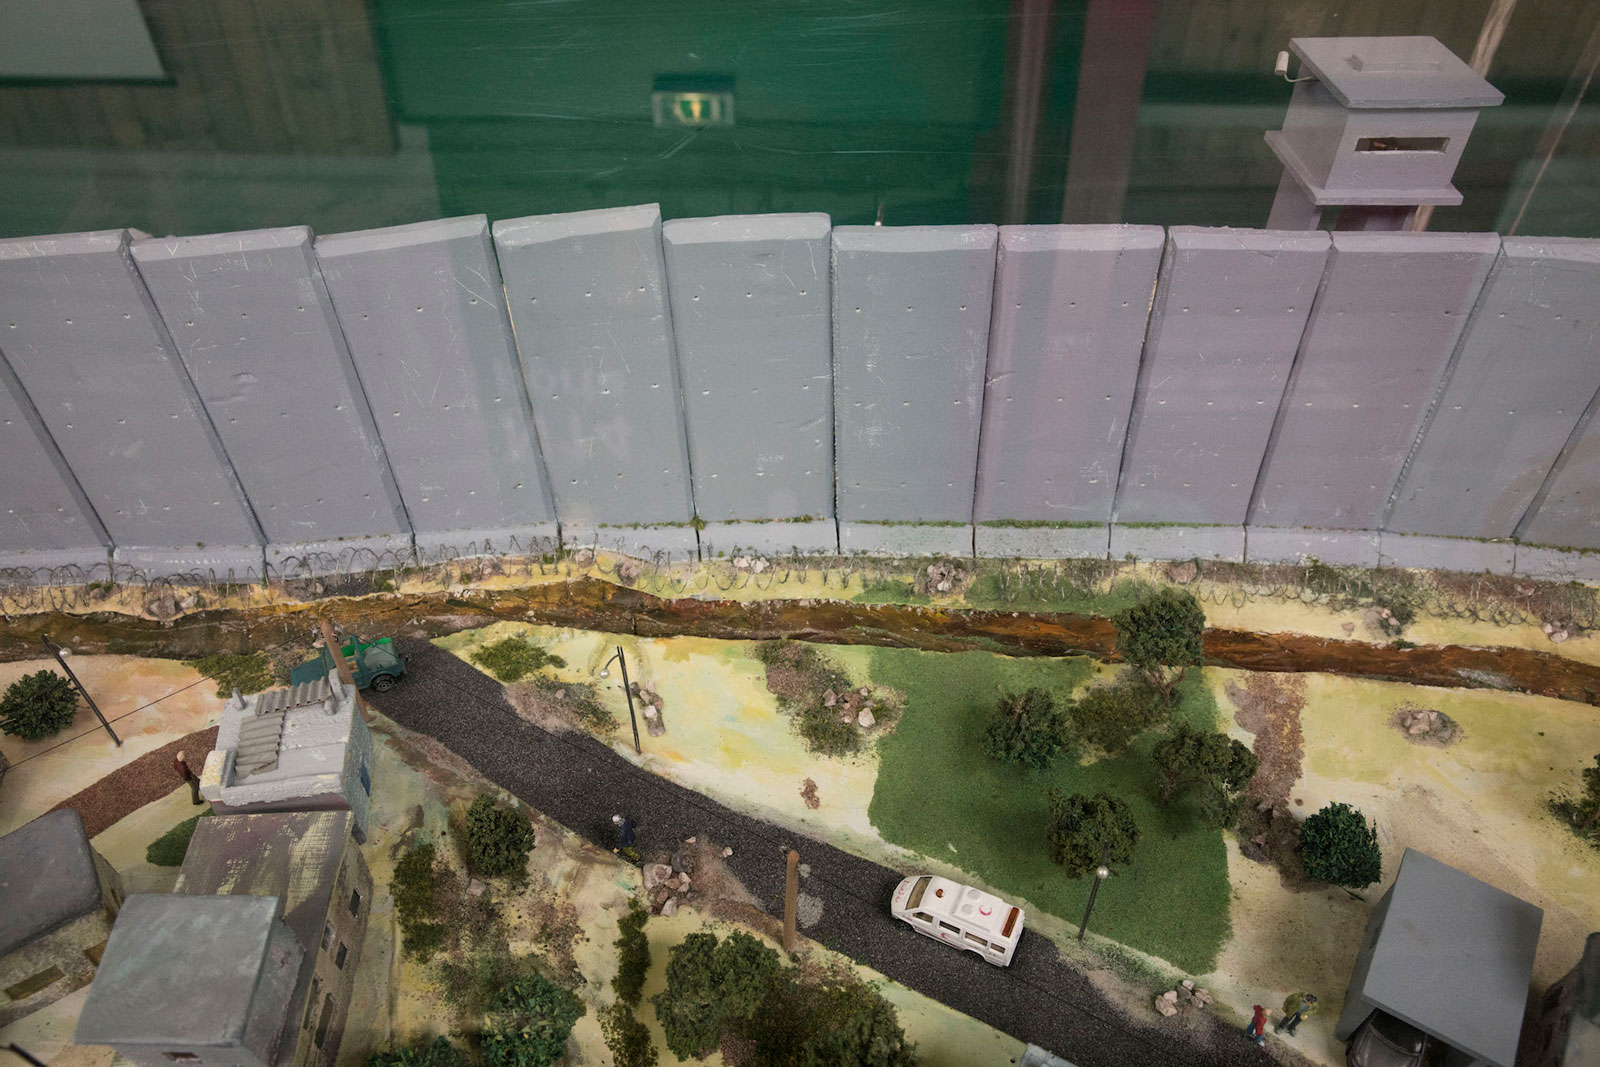 A model of the separation wall in Palestine, Le Bourget, France, May 14, 2016